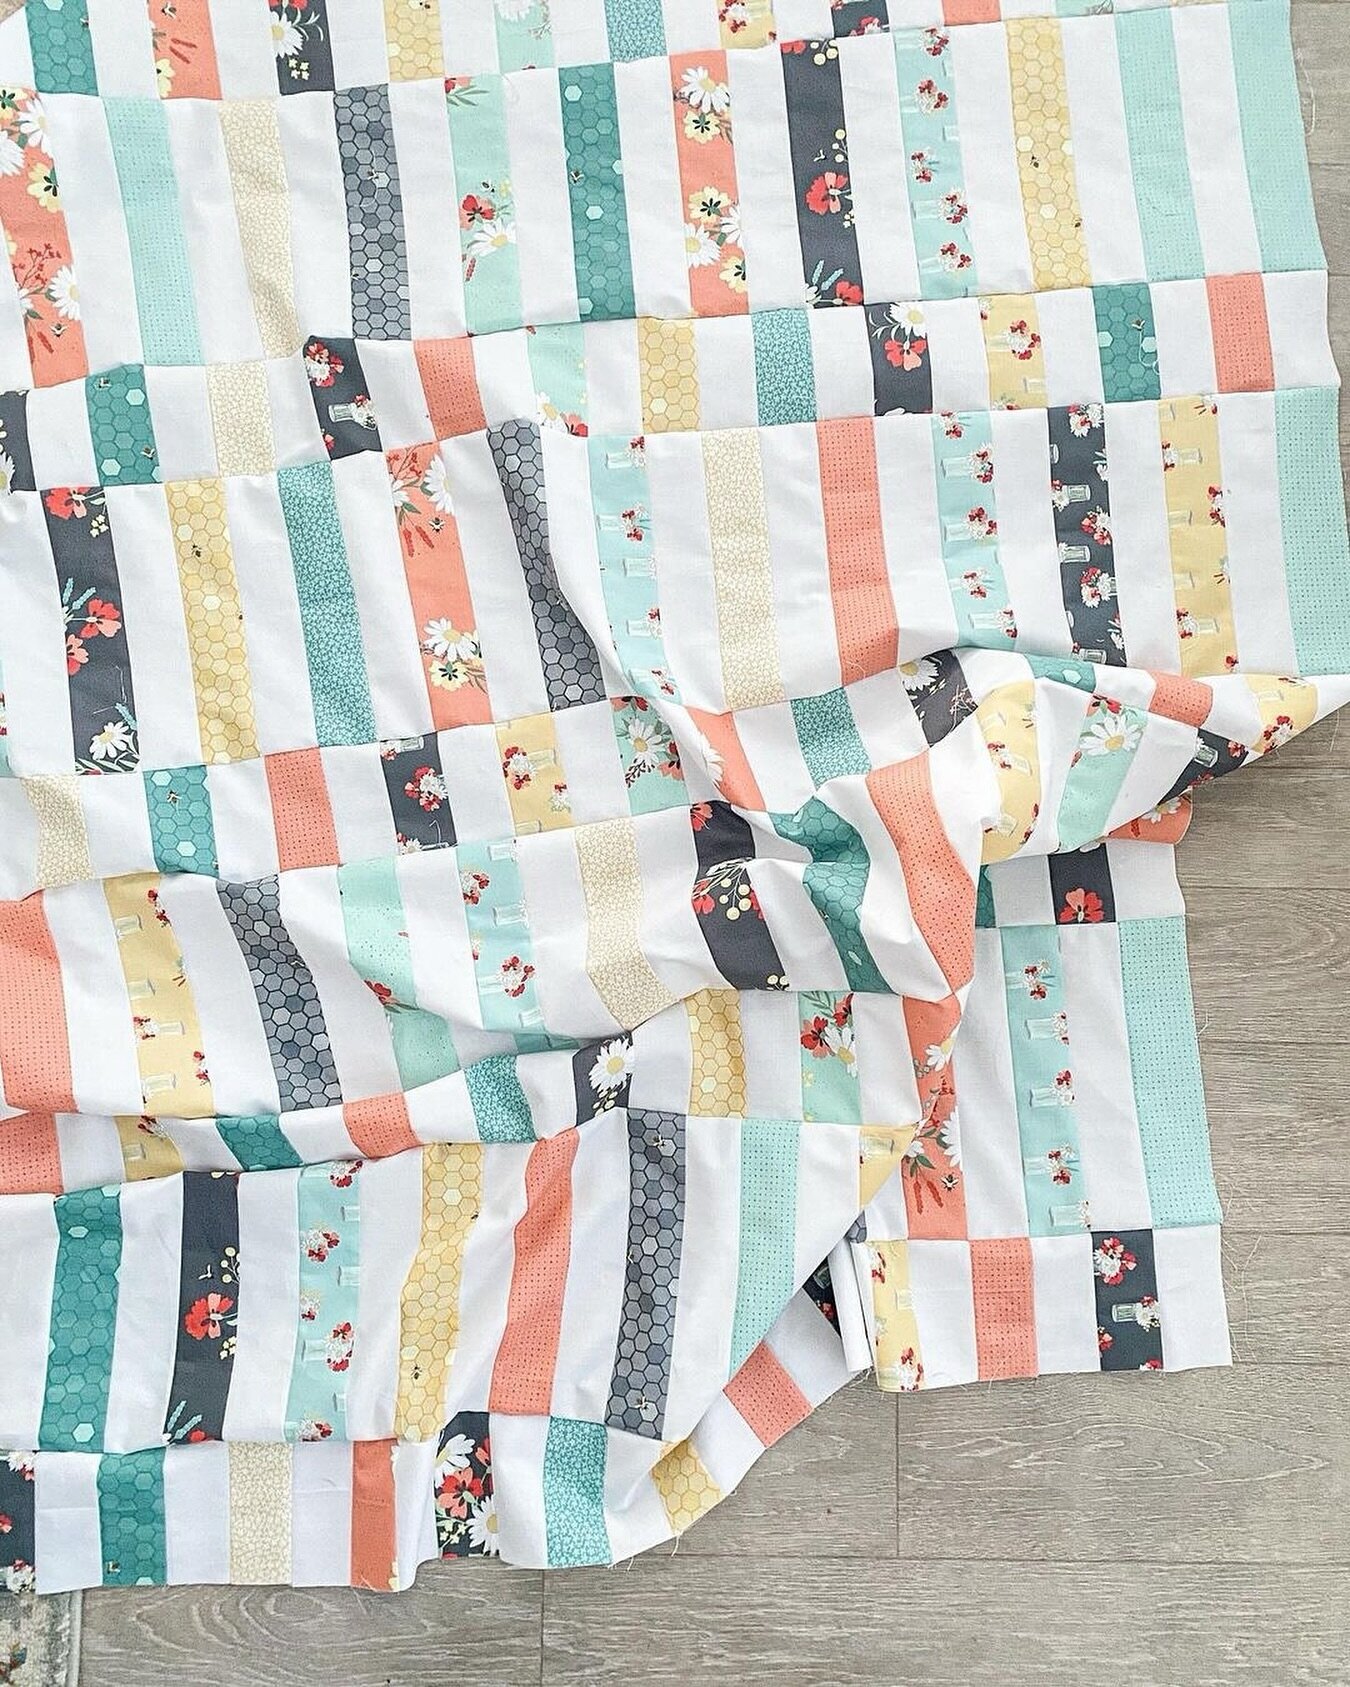 I&rsquo;m in LOVE with Lesley&rsquo;s gorgeous quilt she made with my Sunshine and Sweet Tea fabric! 🤩 Check out all of the details below.

Posted @withregram &bull; @quiltsbylesley Sunshine and Sweet tea ✖️ Madeline! 🐝 ☀️ 

Happy Saturday ✌️ 

Fab